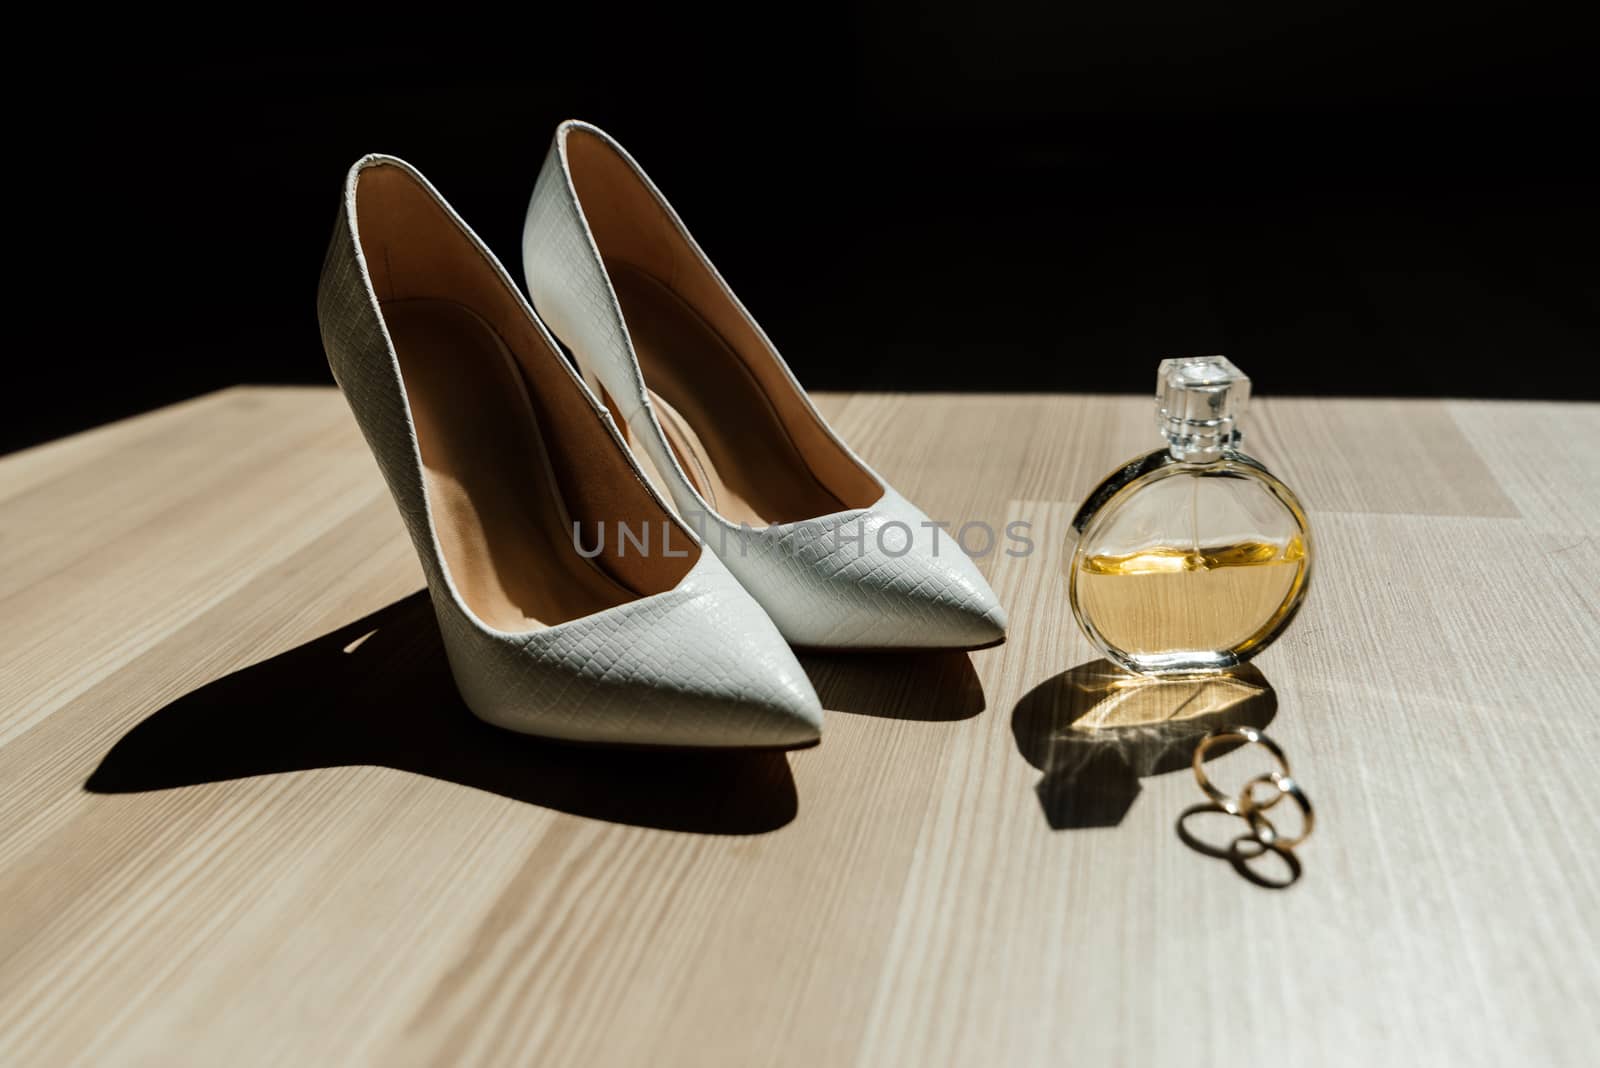 Bride's shoes, perfume and wedding rings are on the table